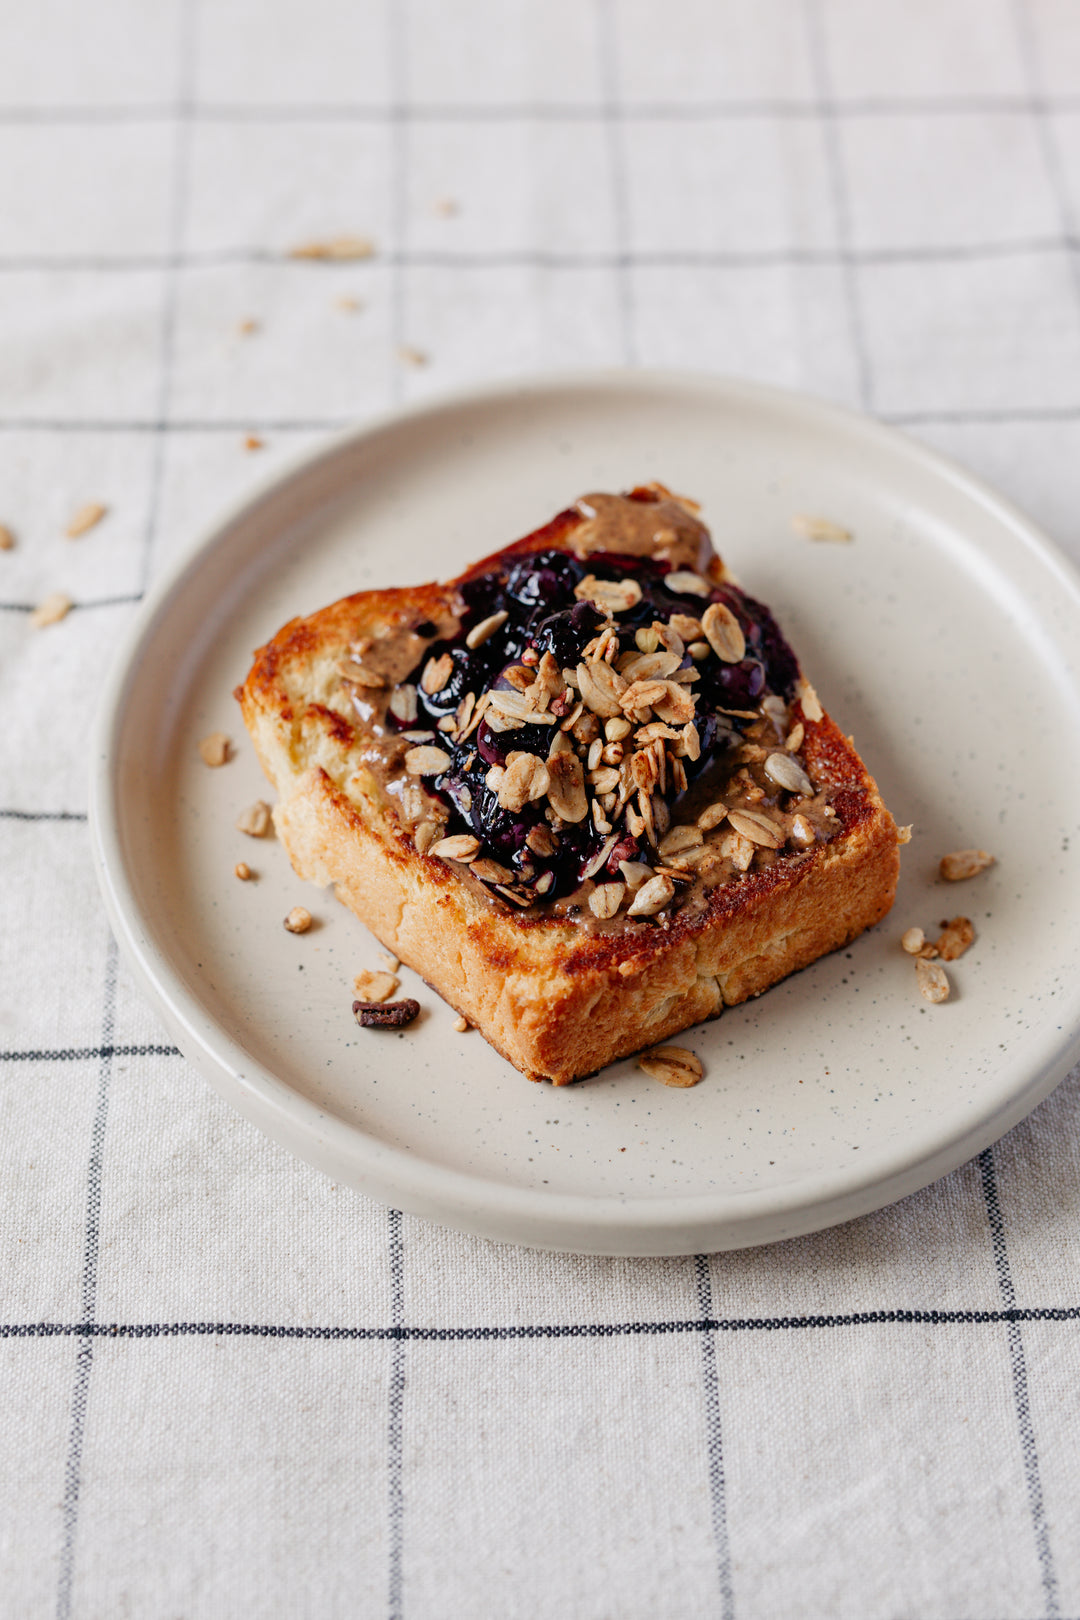 Brioche with hazelnut butter and granola on top